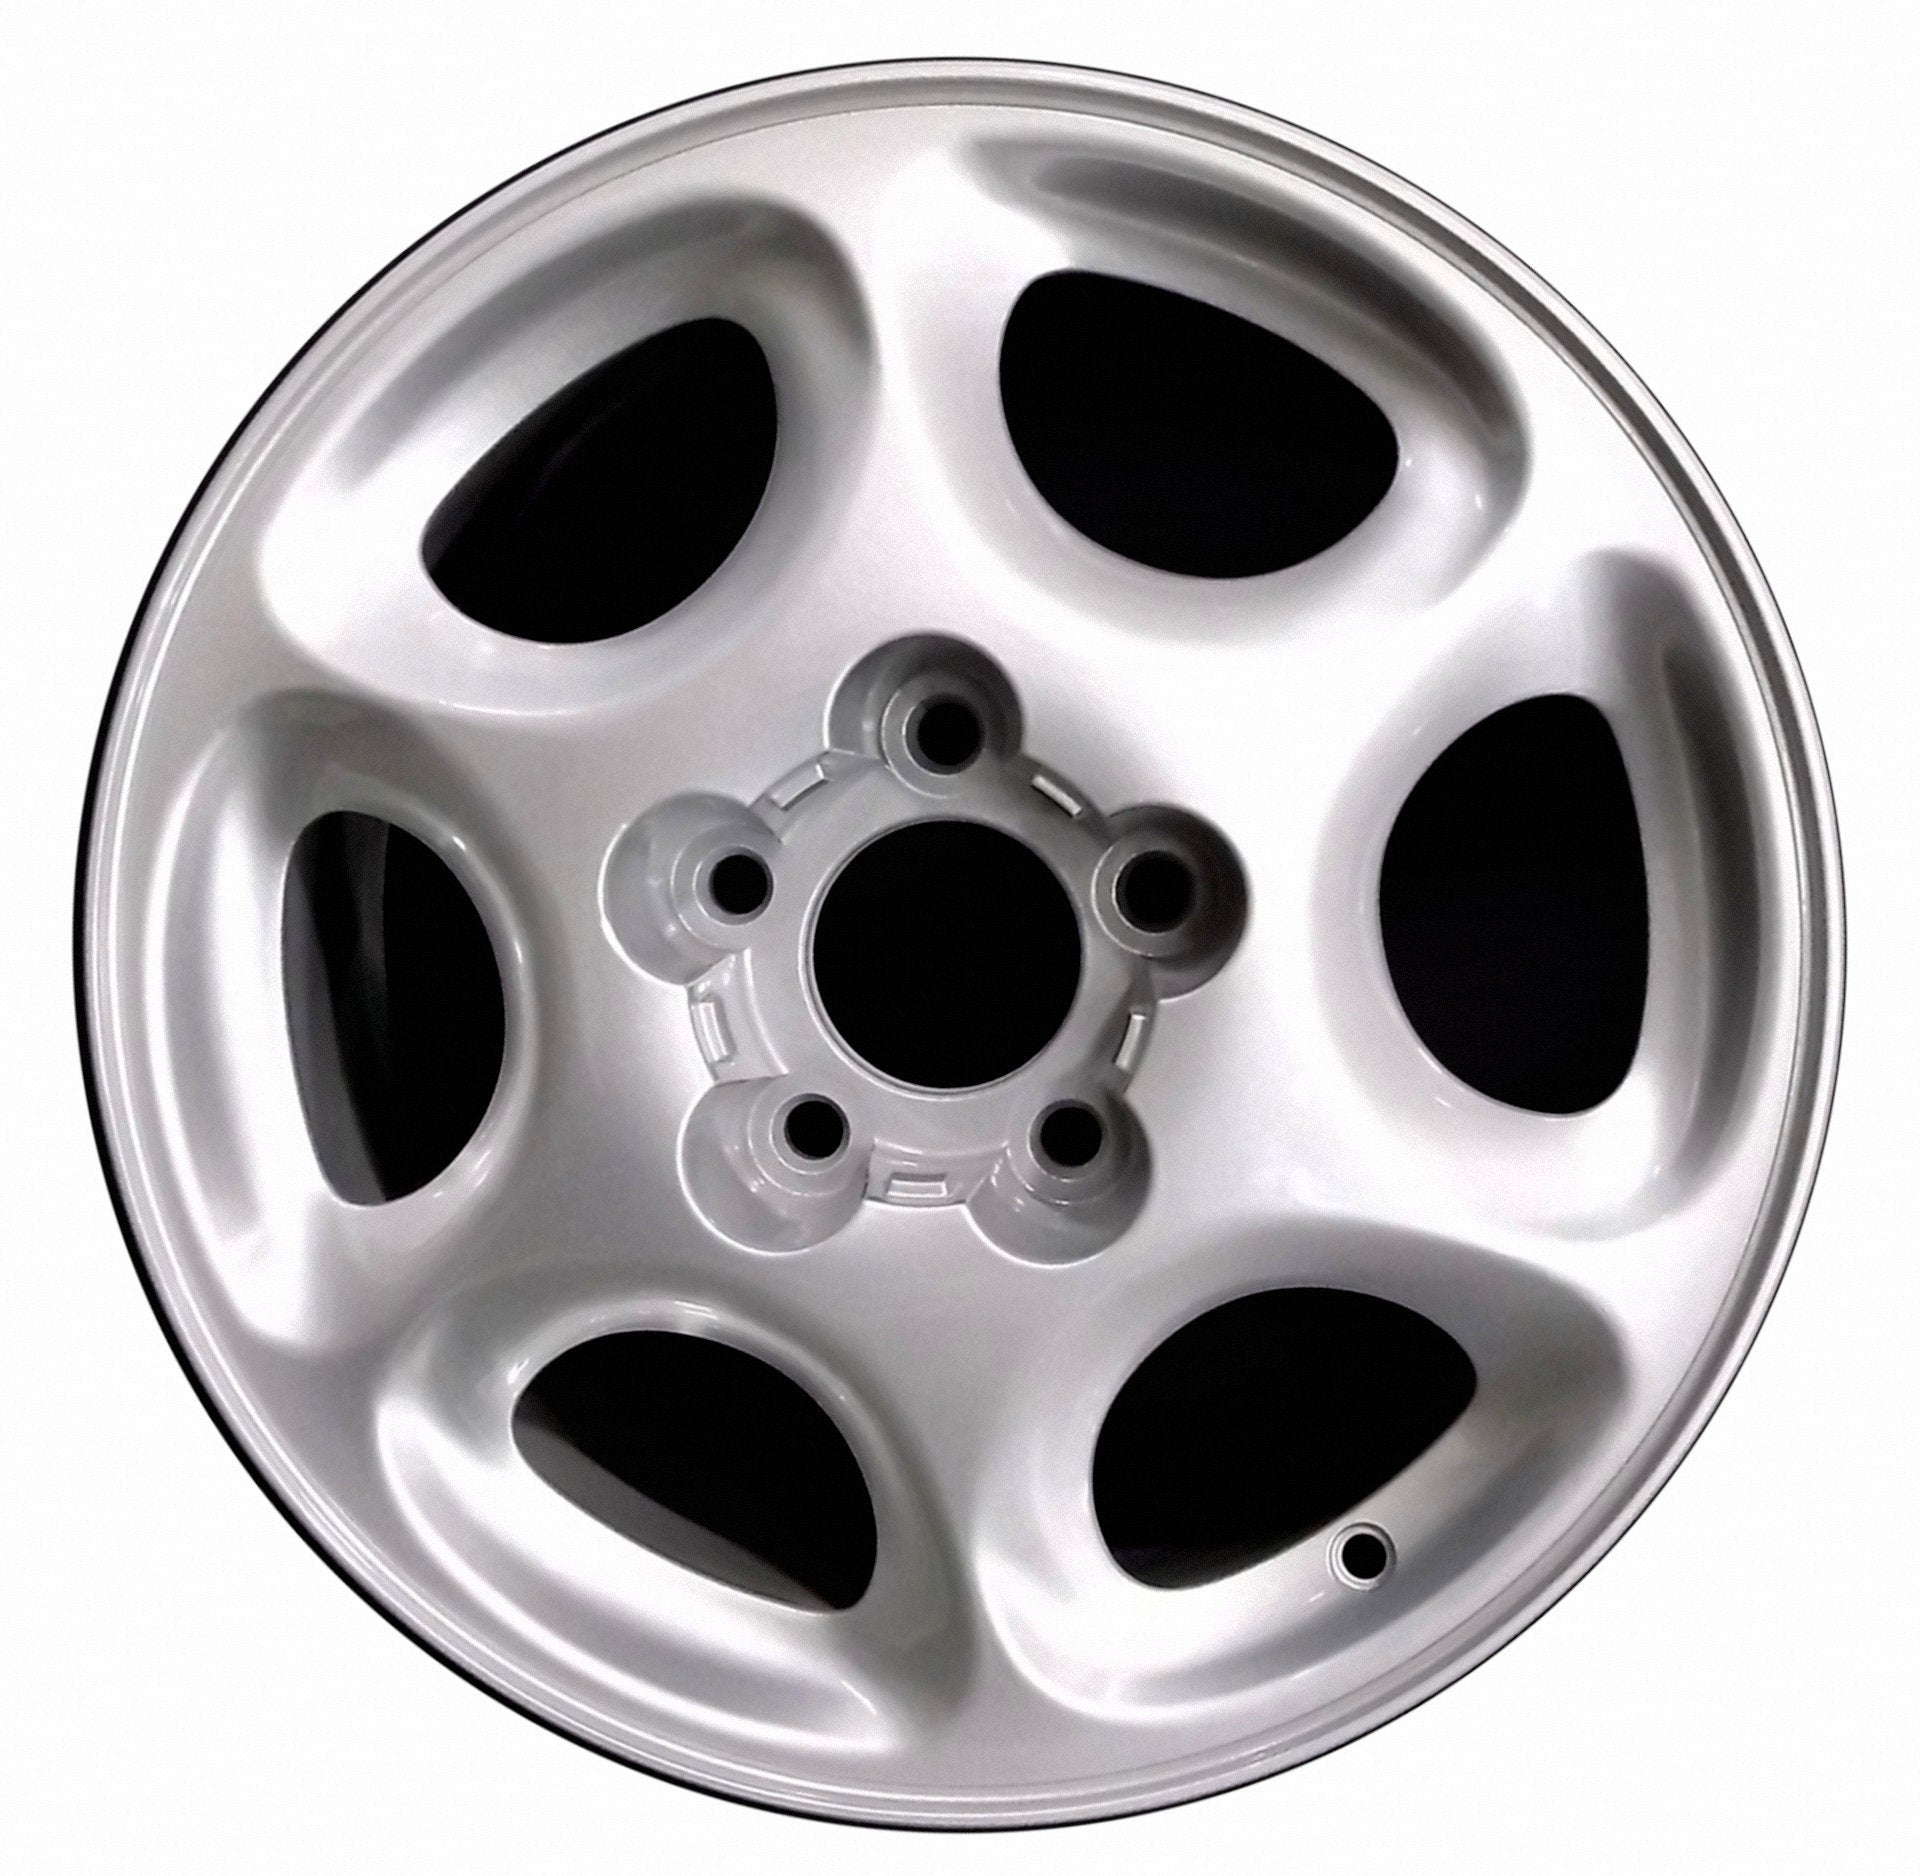 Oldsmobile Silhouette  1999, 2000, 2001, 2002, 2003 Factory OEM Car Wheel Size 16x6.5 Alloy WAO.6030.PS02.FF